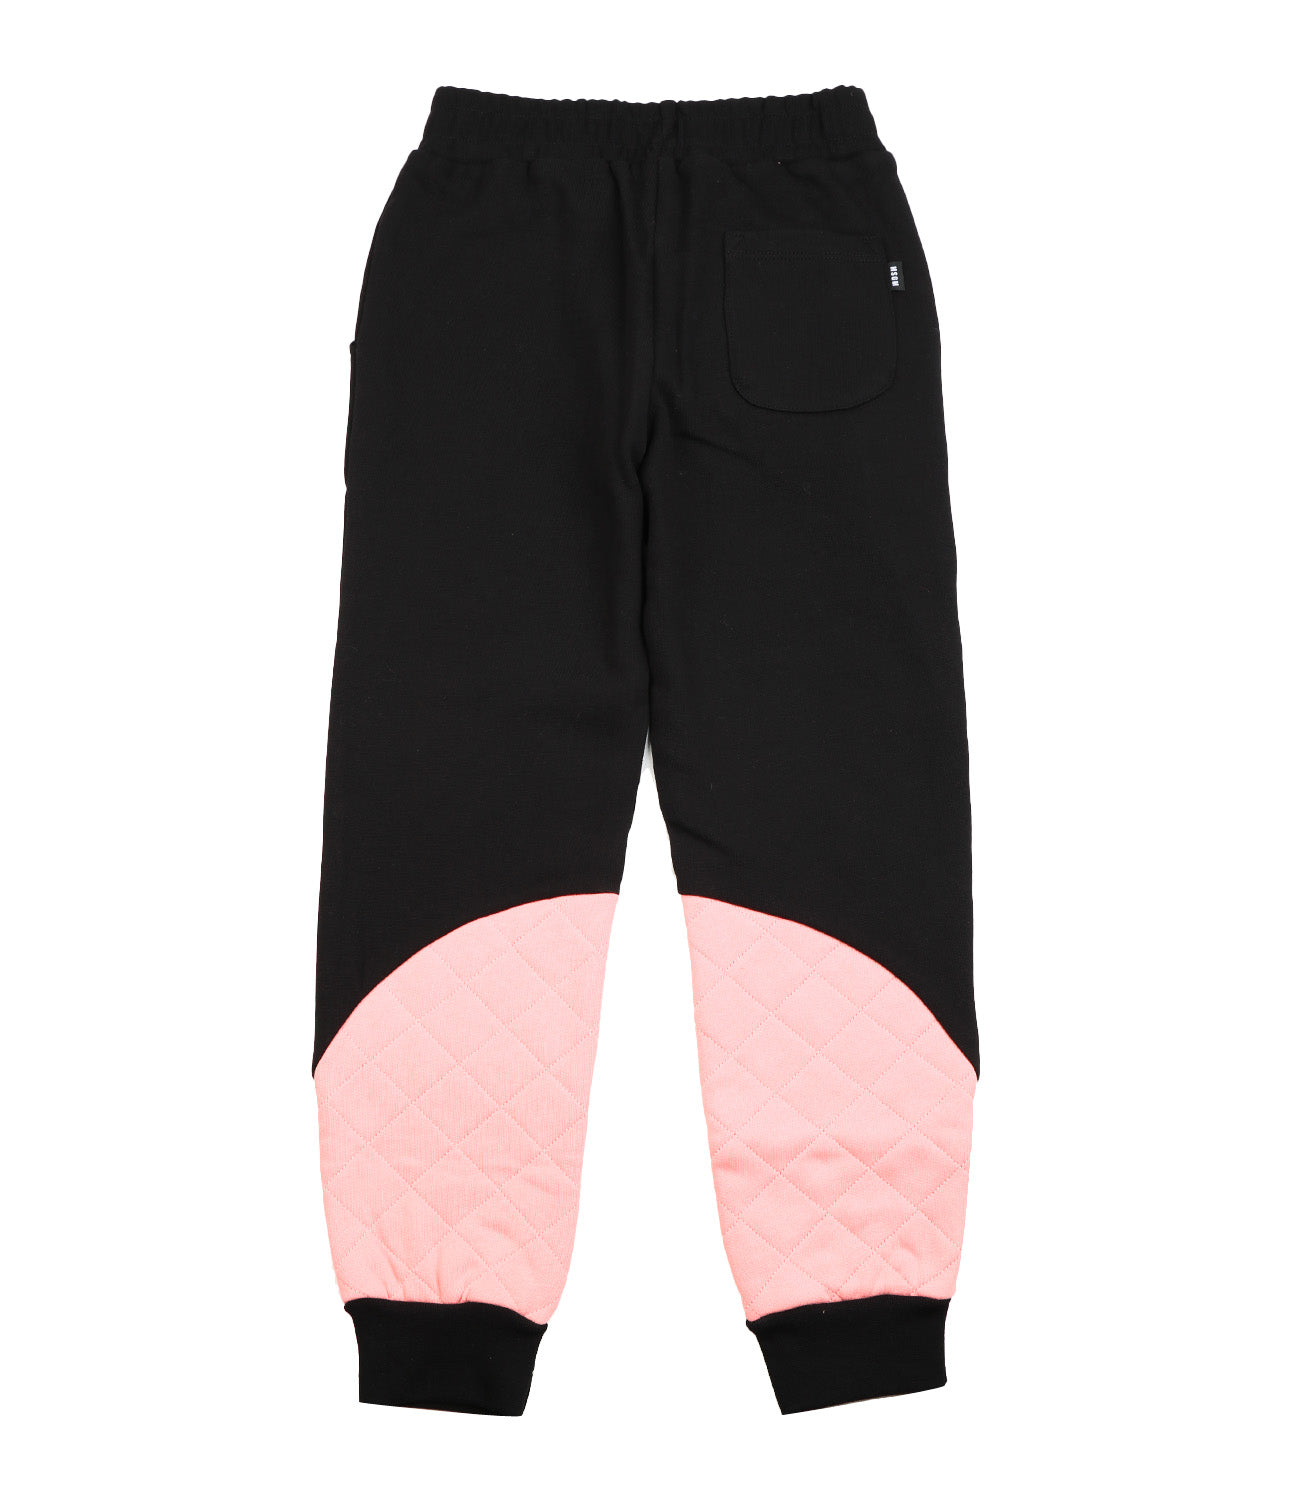 Black and Peach Sports Pants